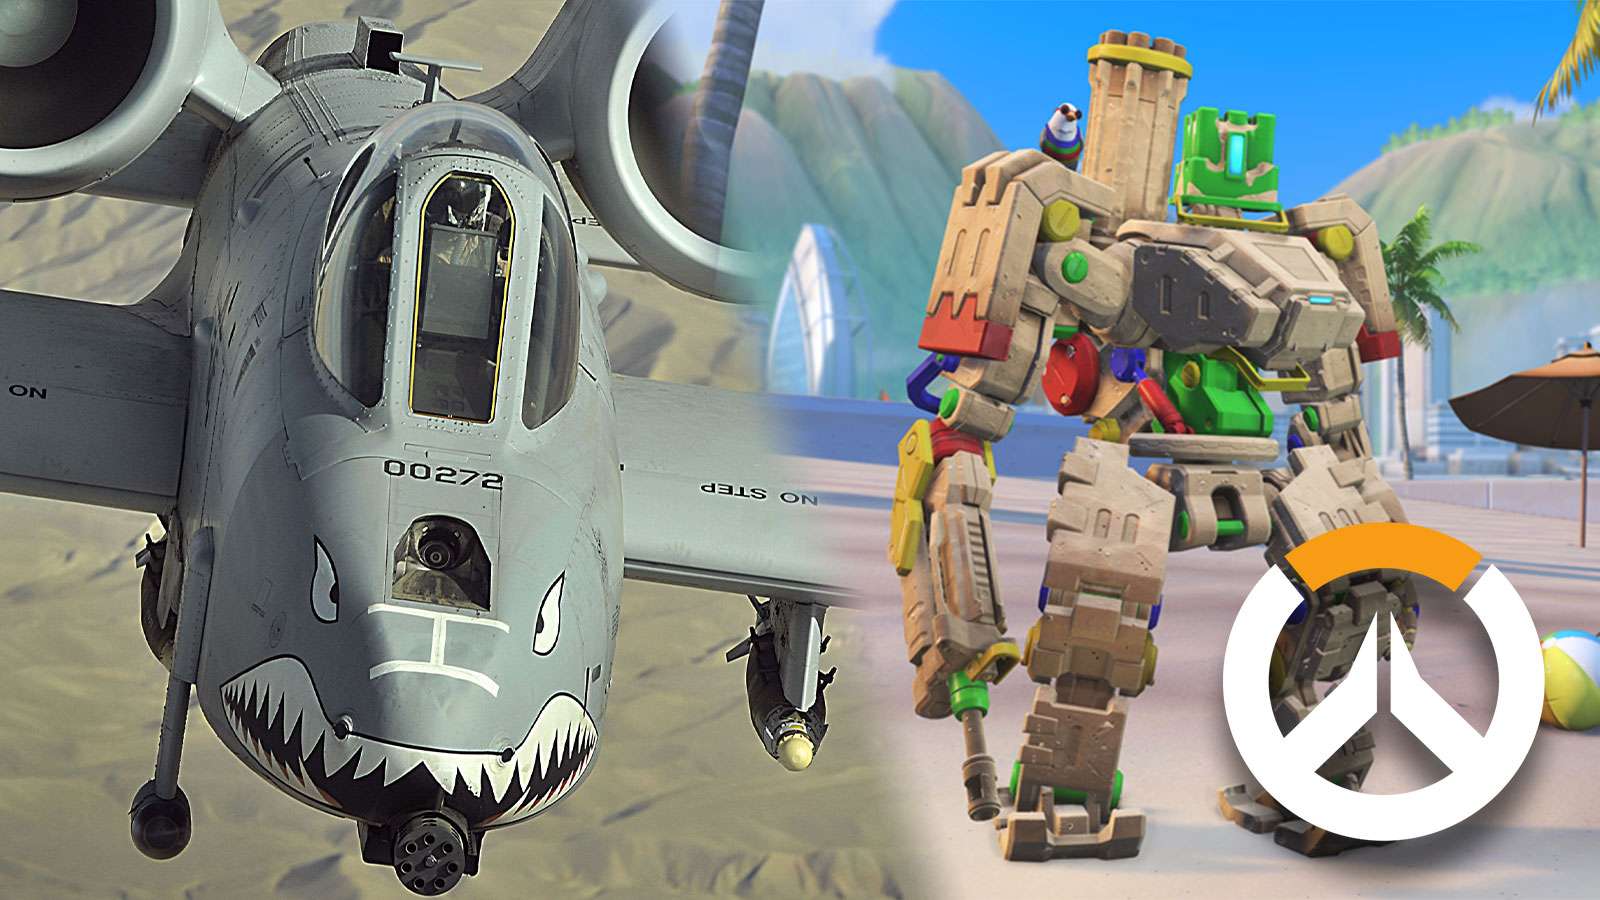 Bastion but he is an A-10 Warthog jet fighter